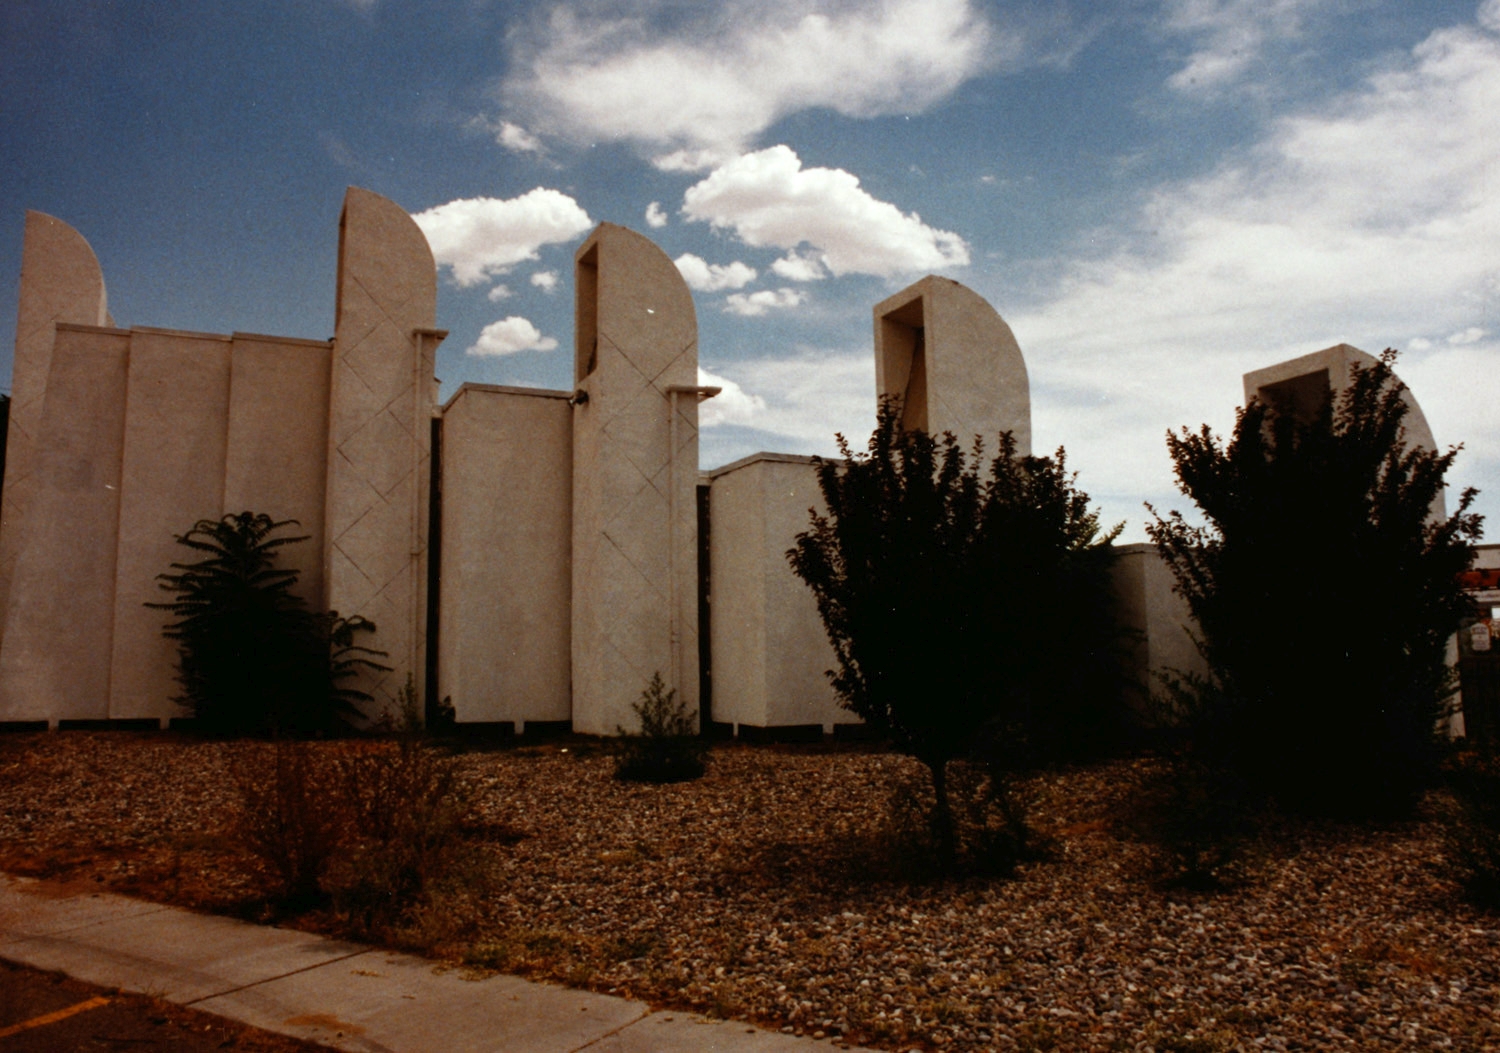 Exterior view, showing concrete facade and towers prior to painting